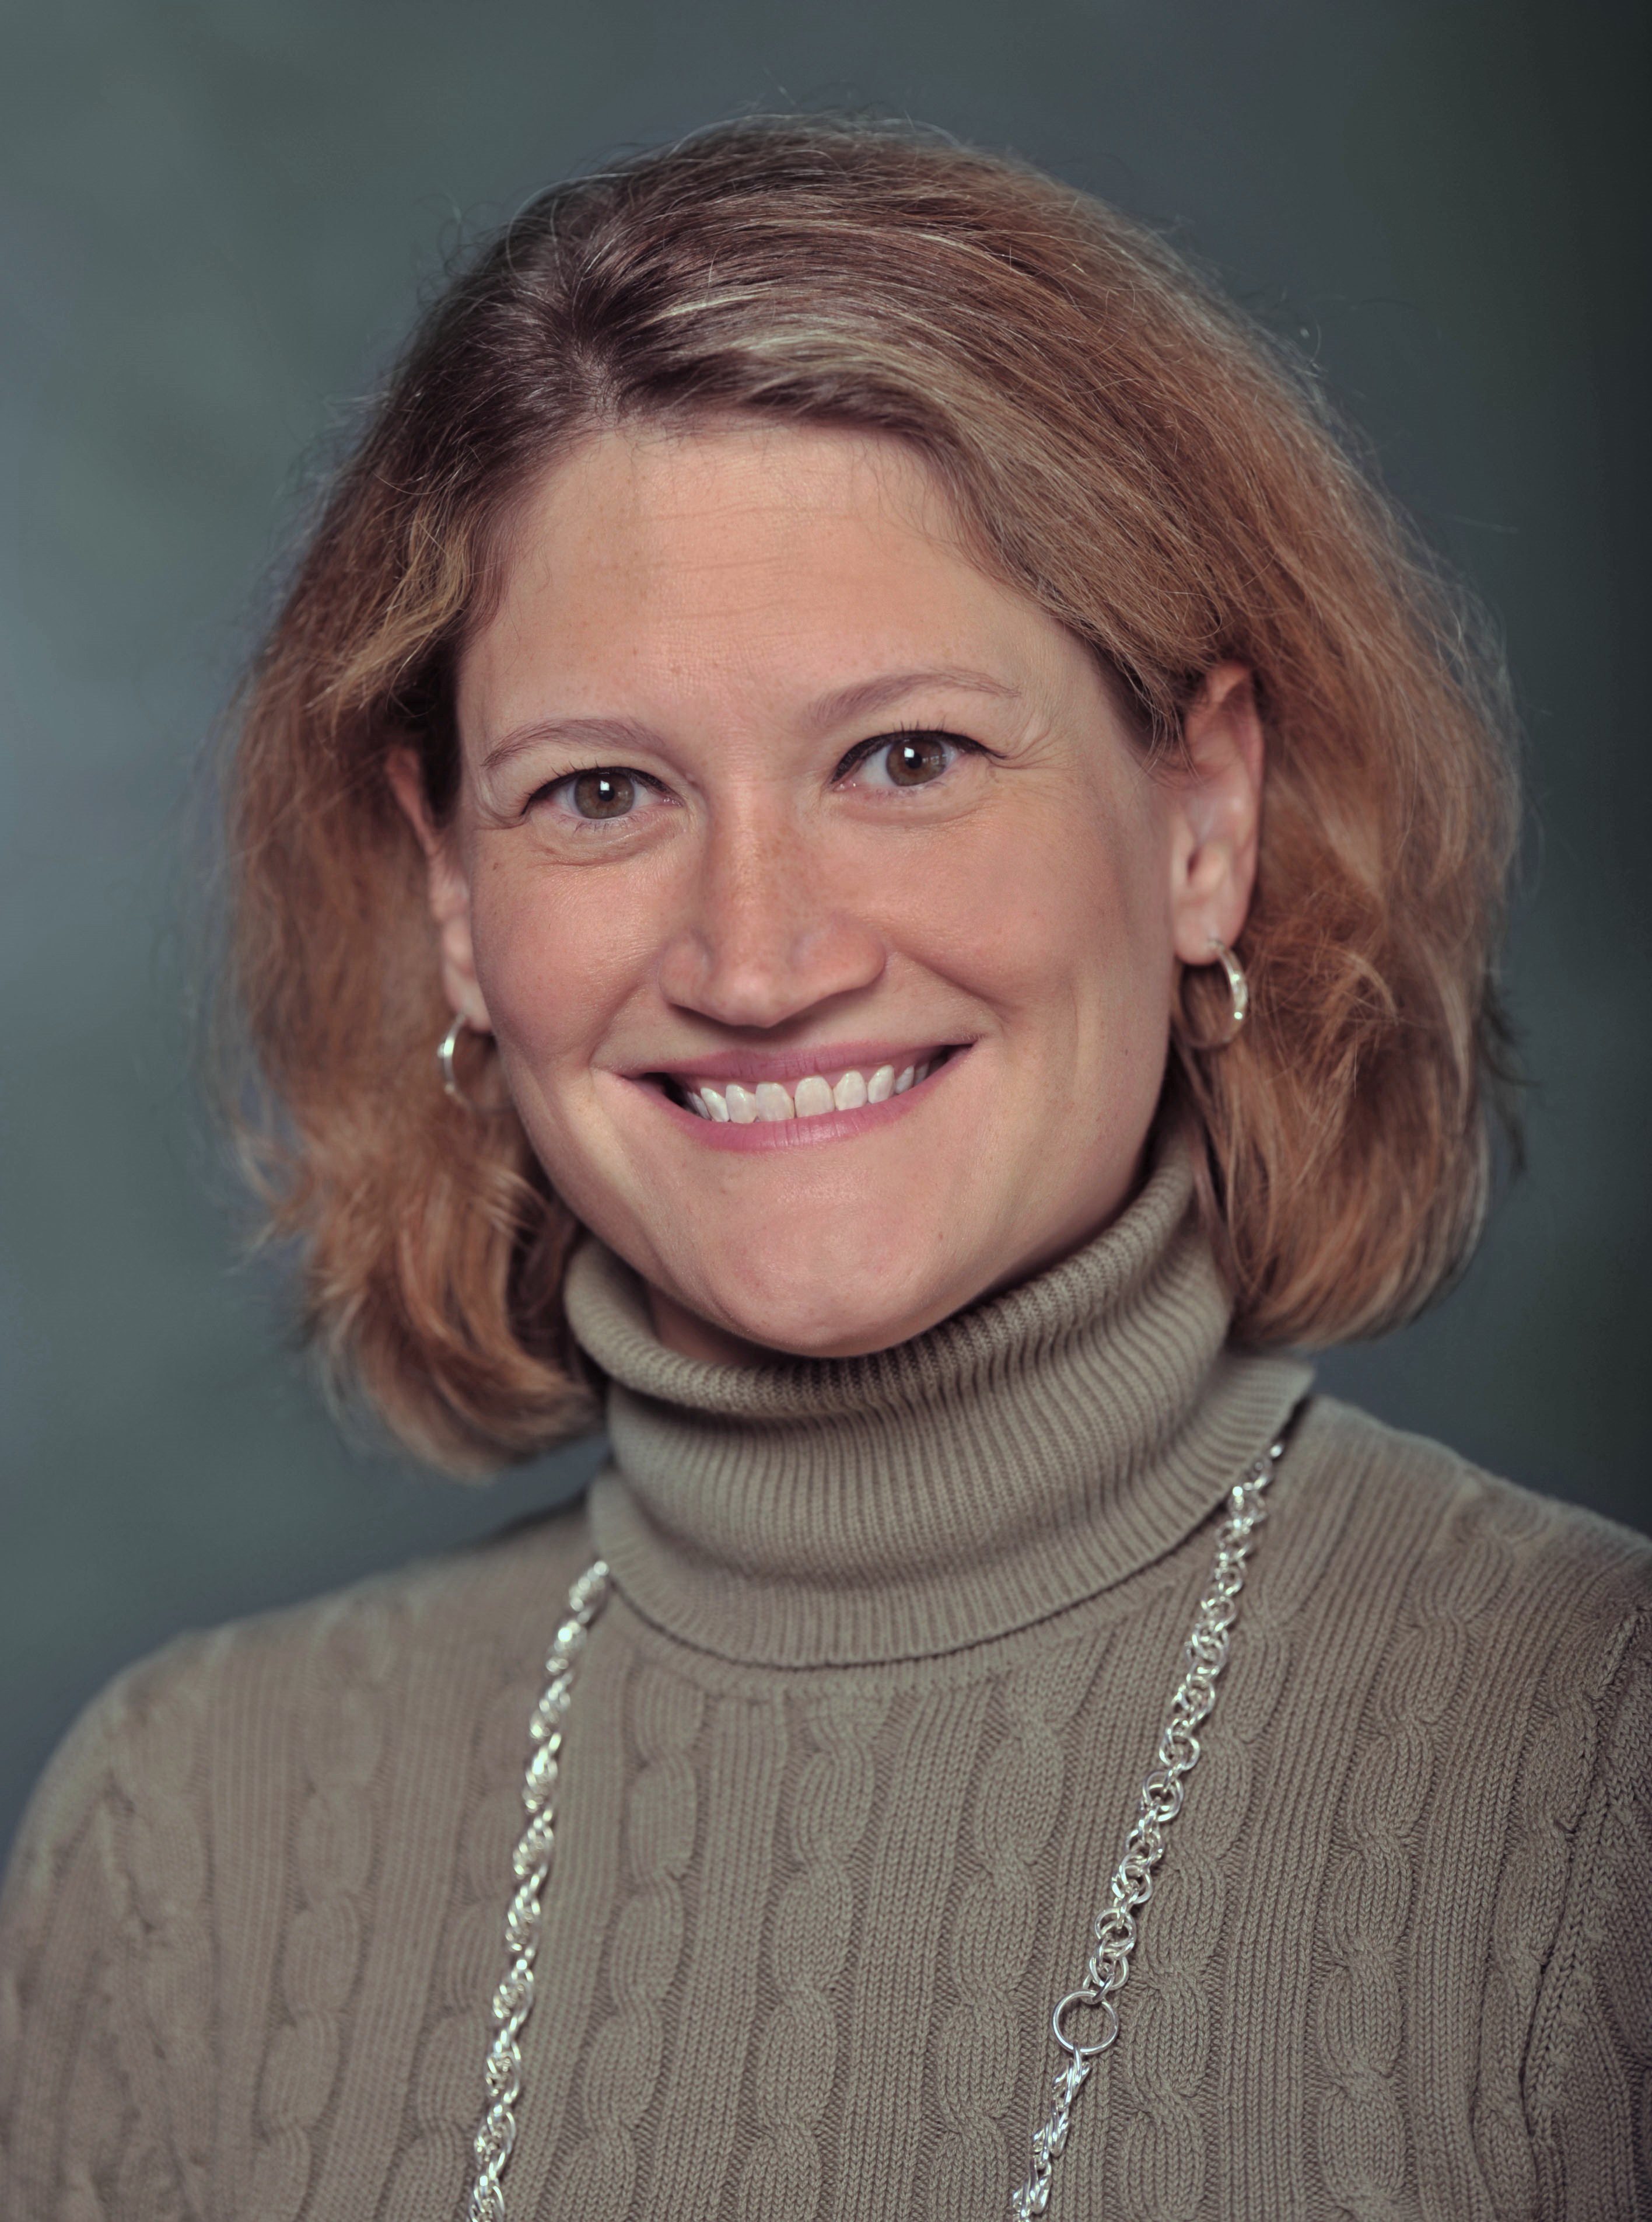 Marie Hansen is the dean of the College of Business at Husson University.